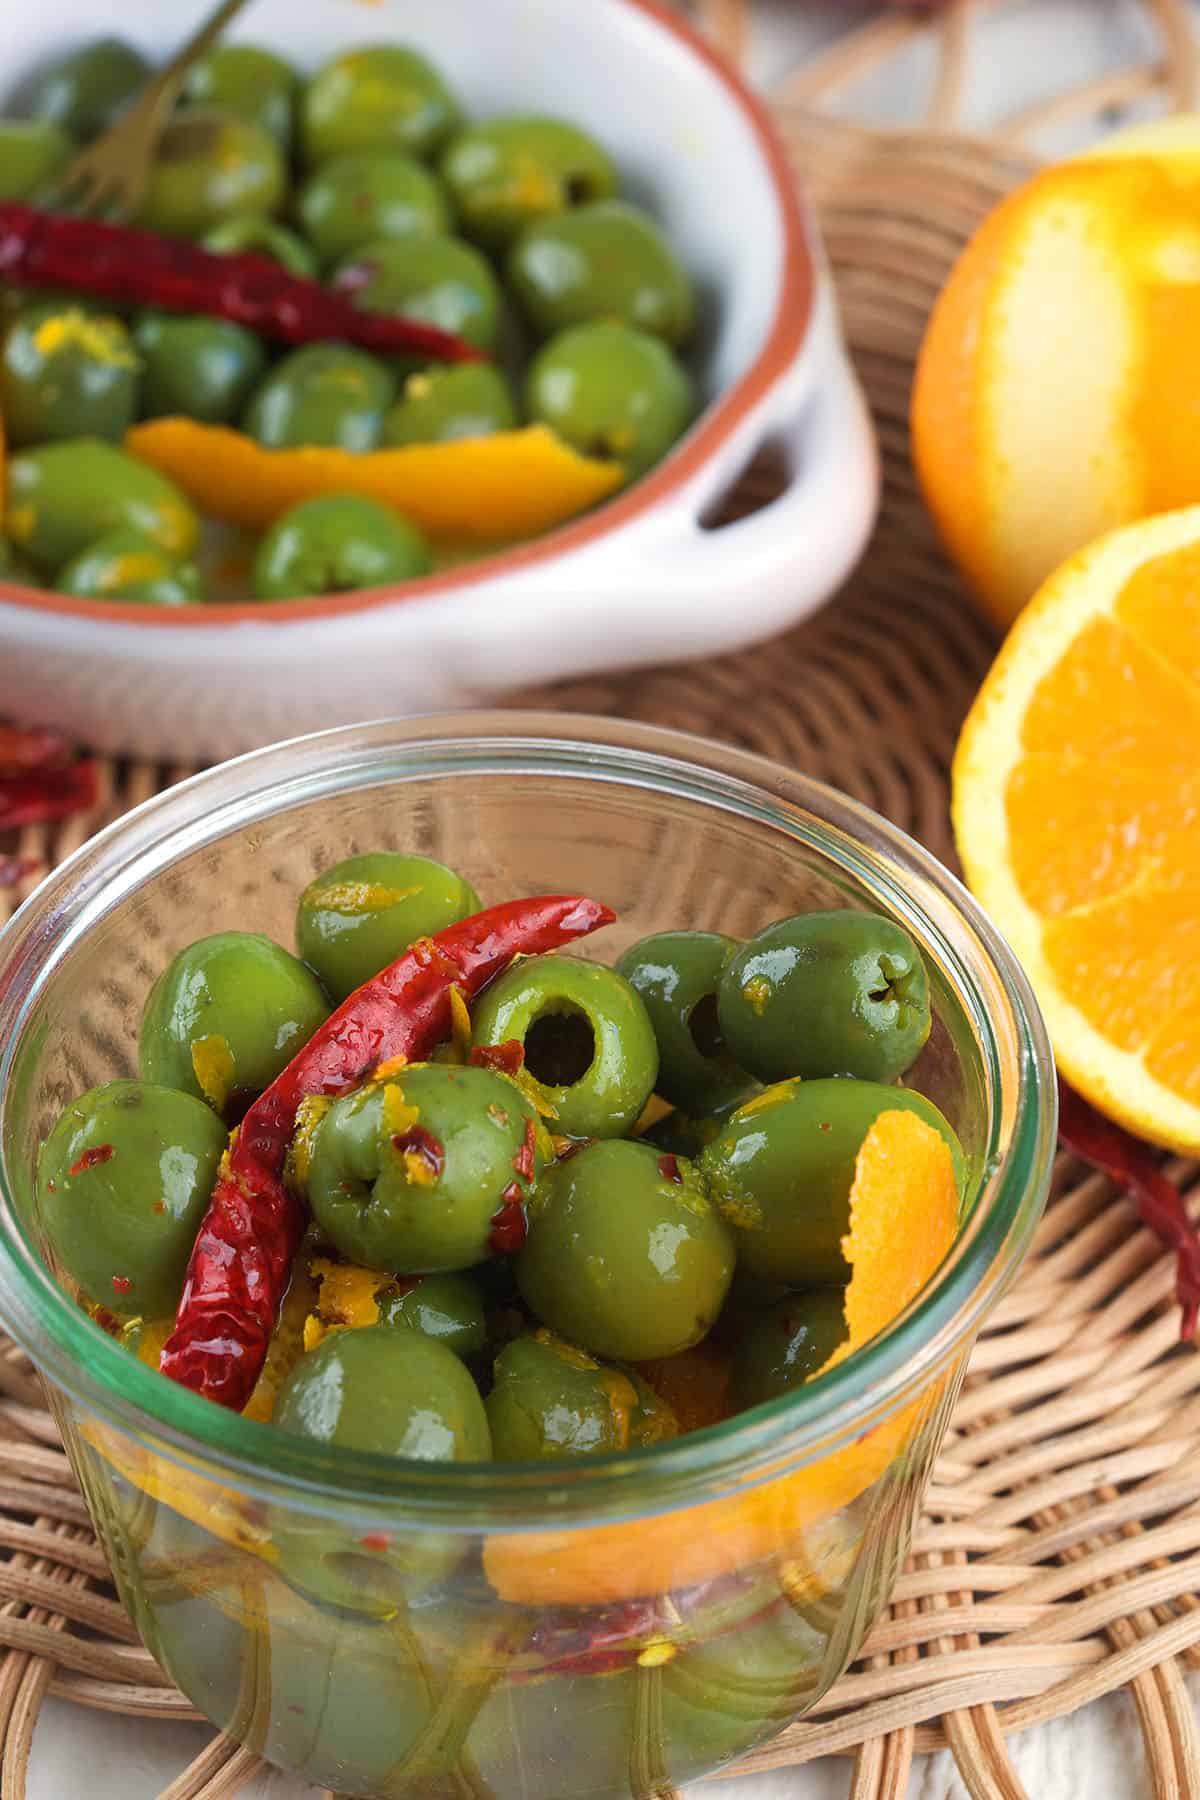 A small jar of olives is placed next to a larger bowl. 